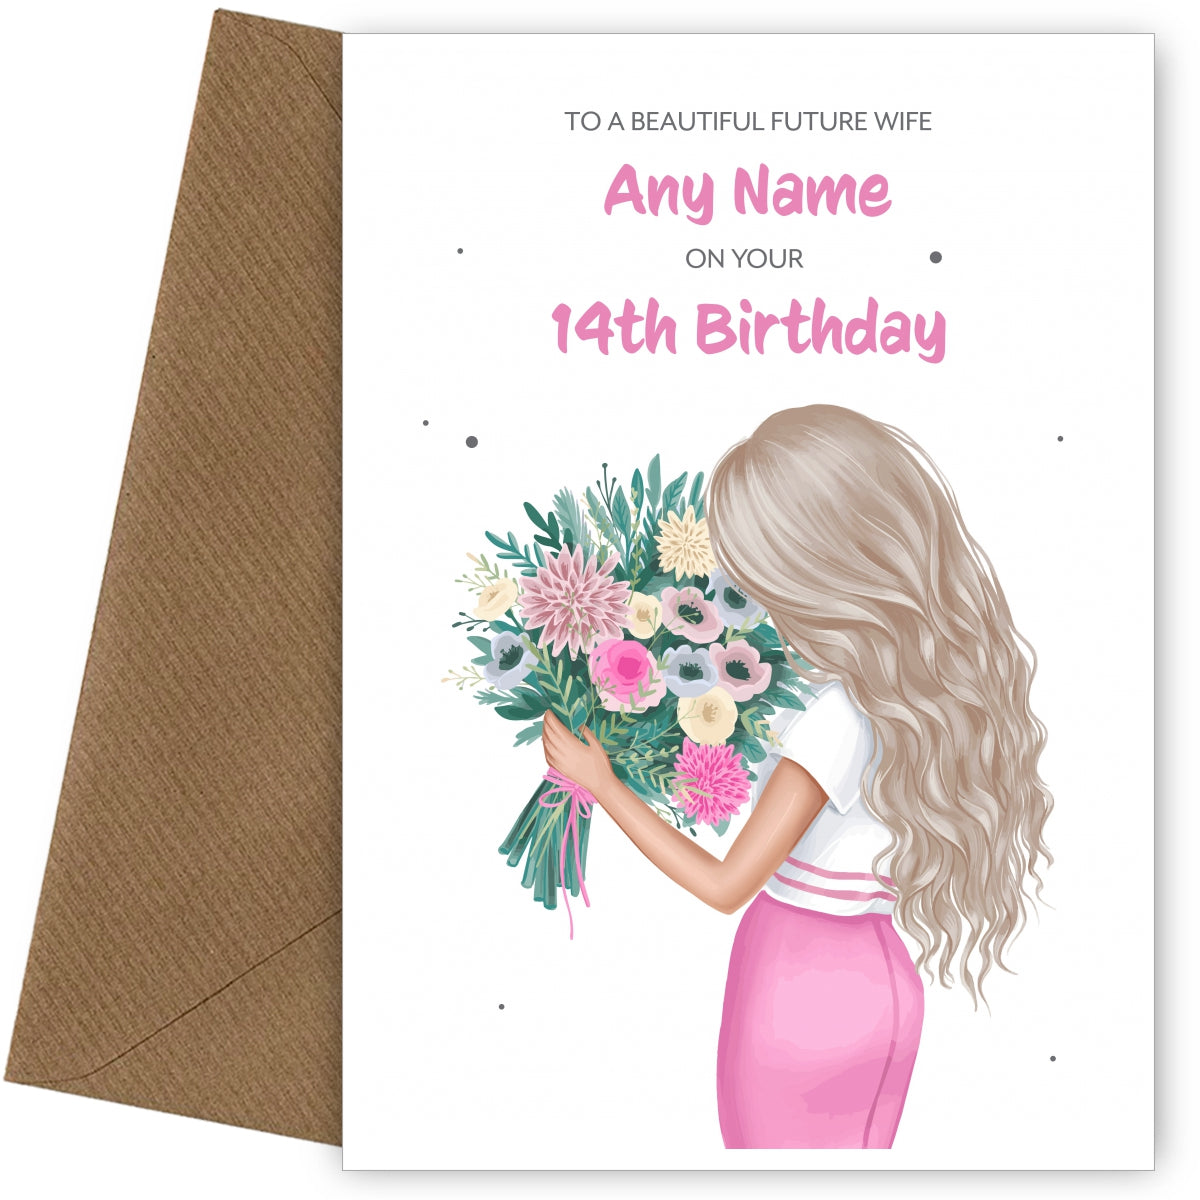 14th Birthday Card for Future Wife - Beautiful Blonde